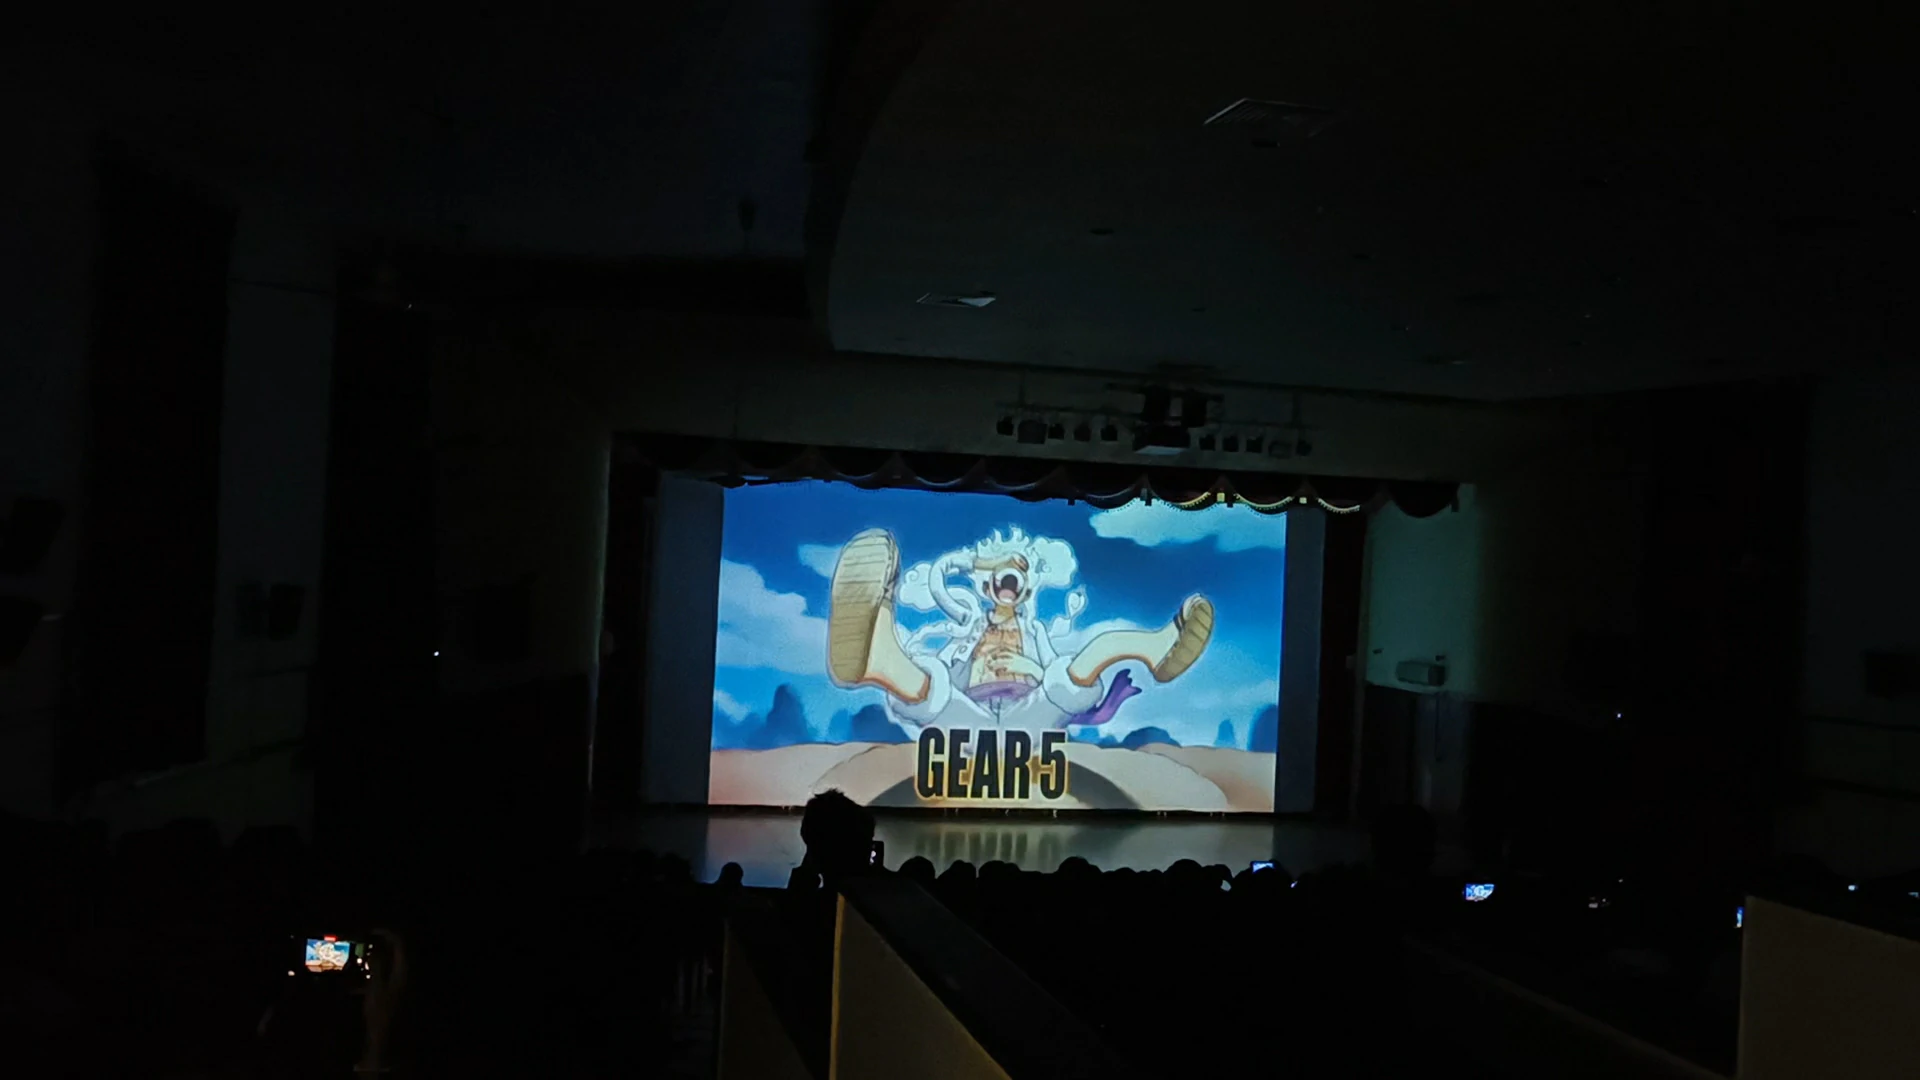 Gear 5 Appearance in the anime (image from the auditorium)